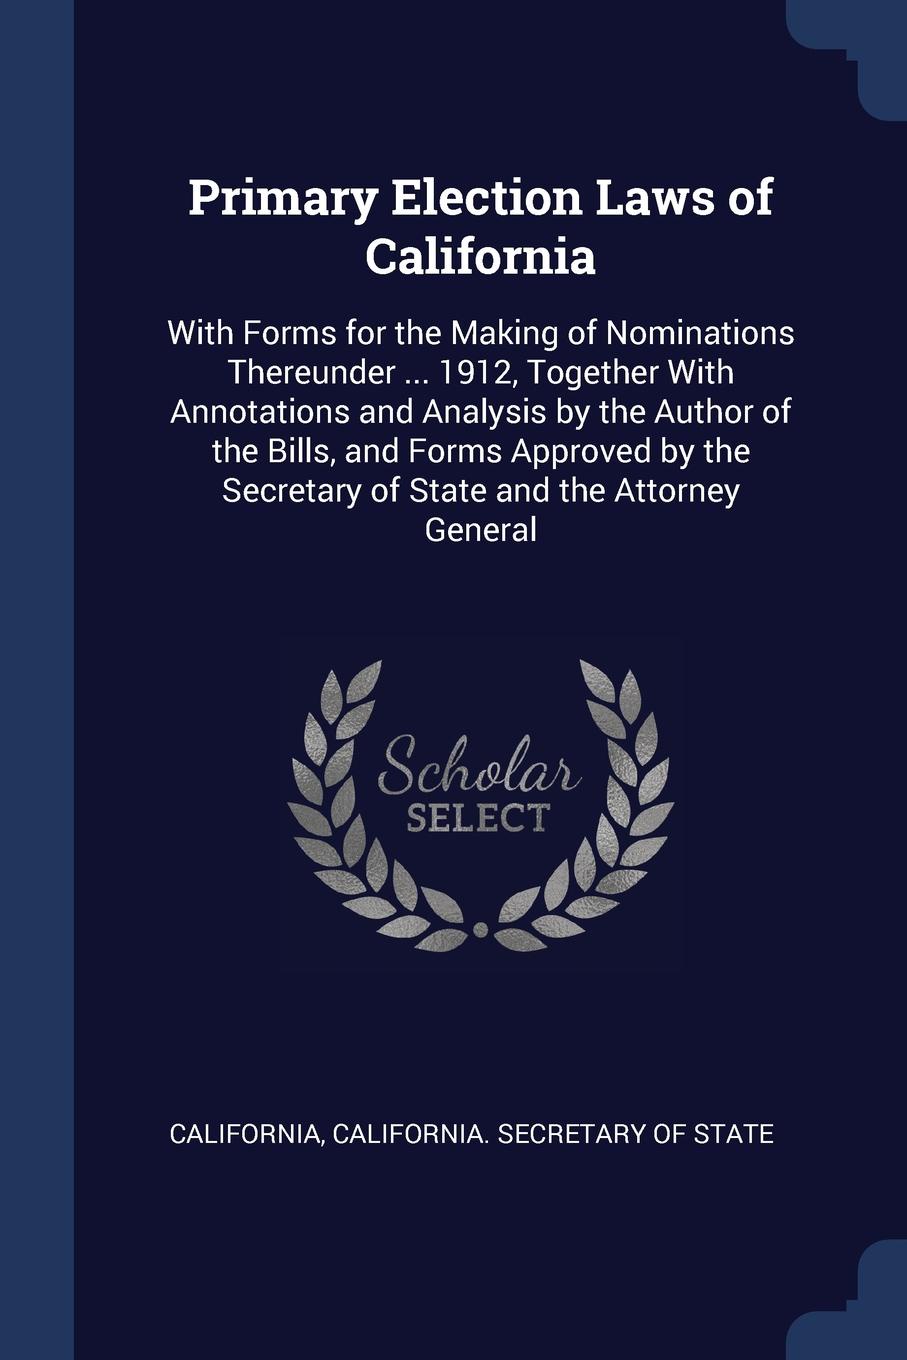 Primary Election Laws of California. With Forms for the Making of Nominations Thereunder ... 1912, Together With Annotations and Analysis by the Author of the Bills, and Forms Approved by the Secretary of State and the Attorney General